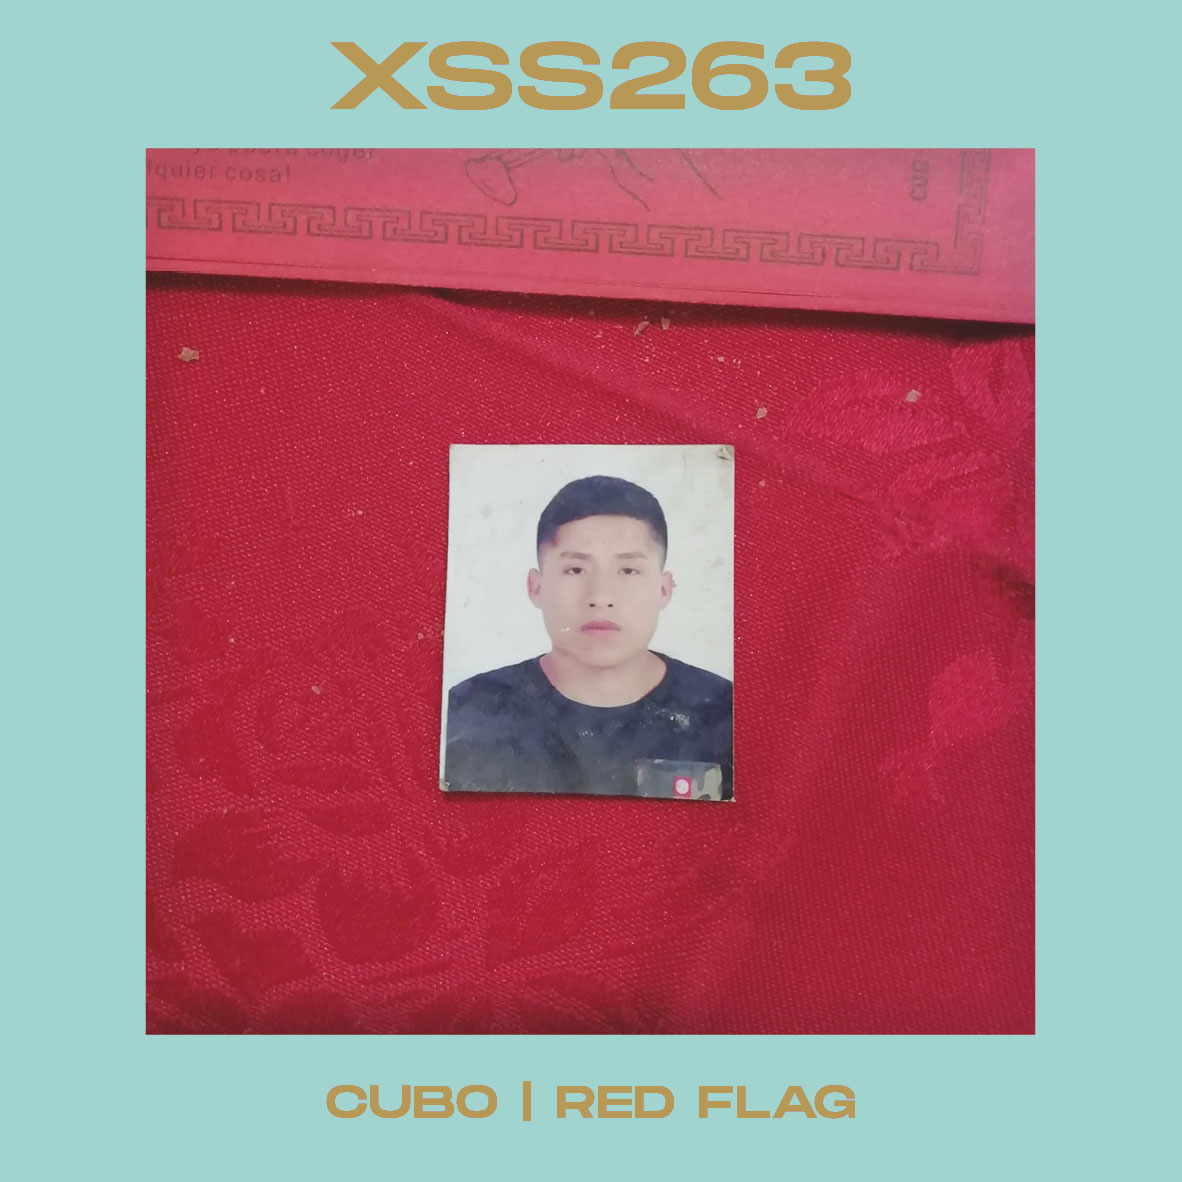 XSS263 | Cubo | Red Flag